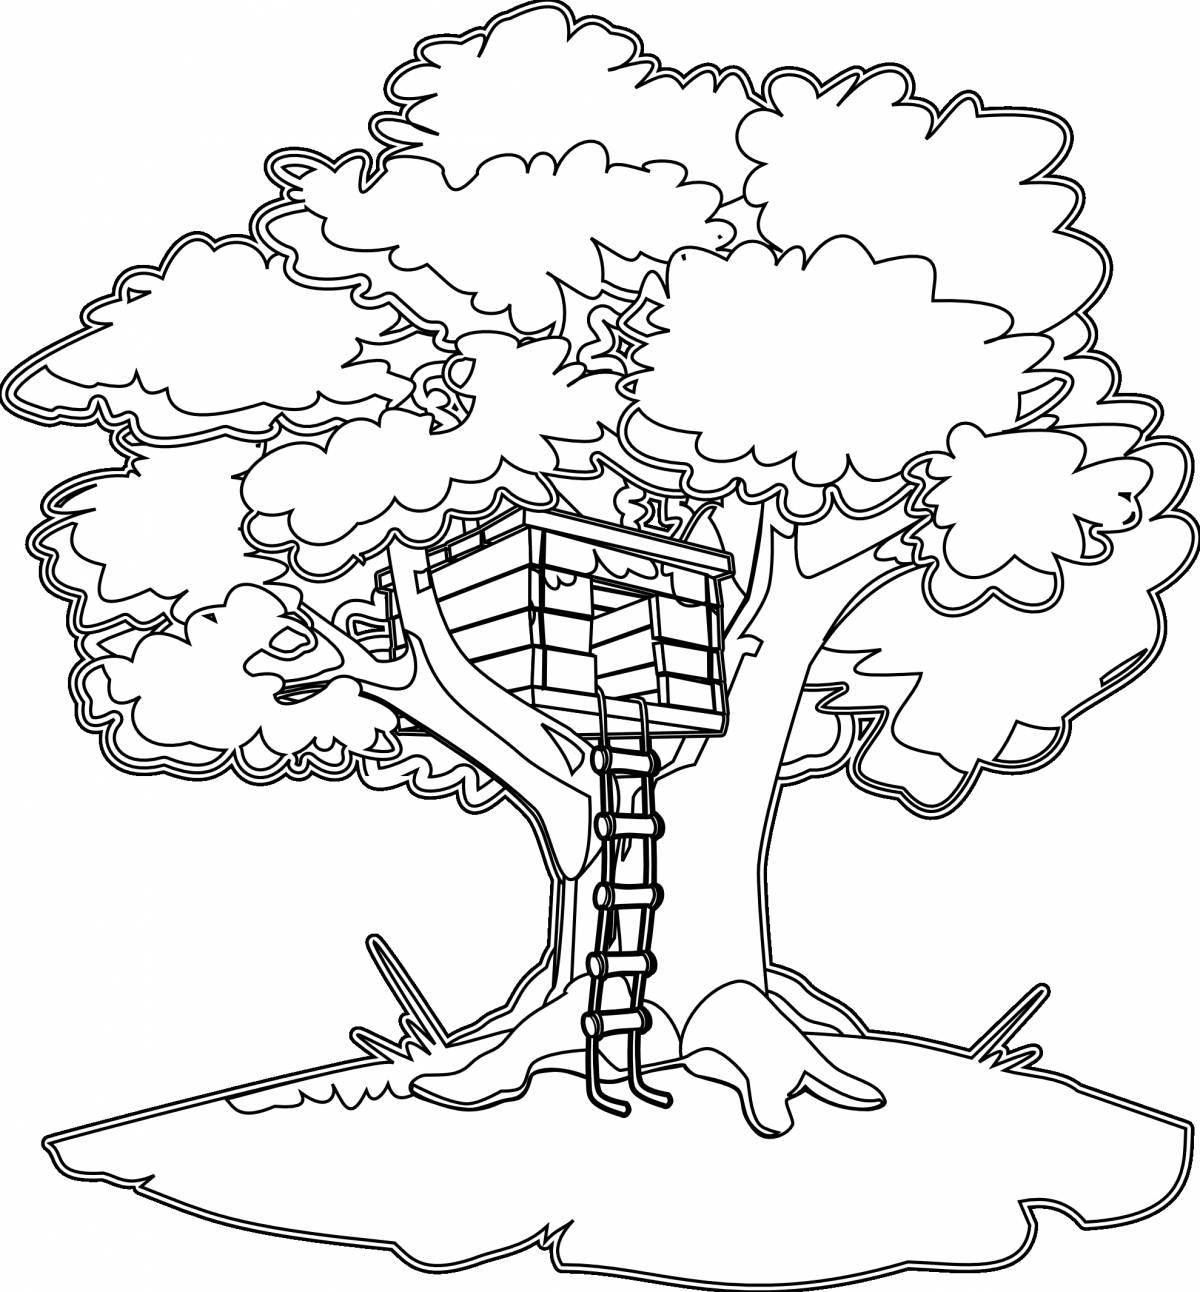 Great fairy tree coloring book